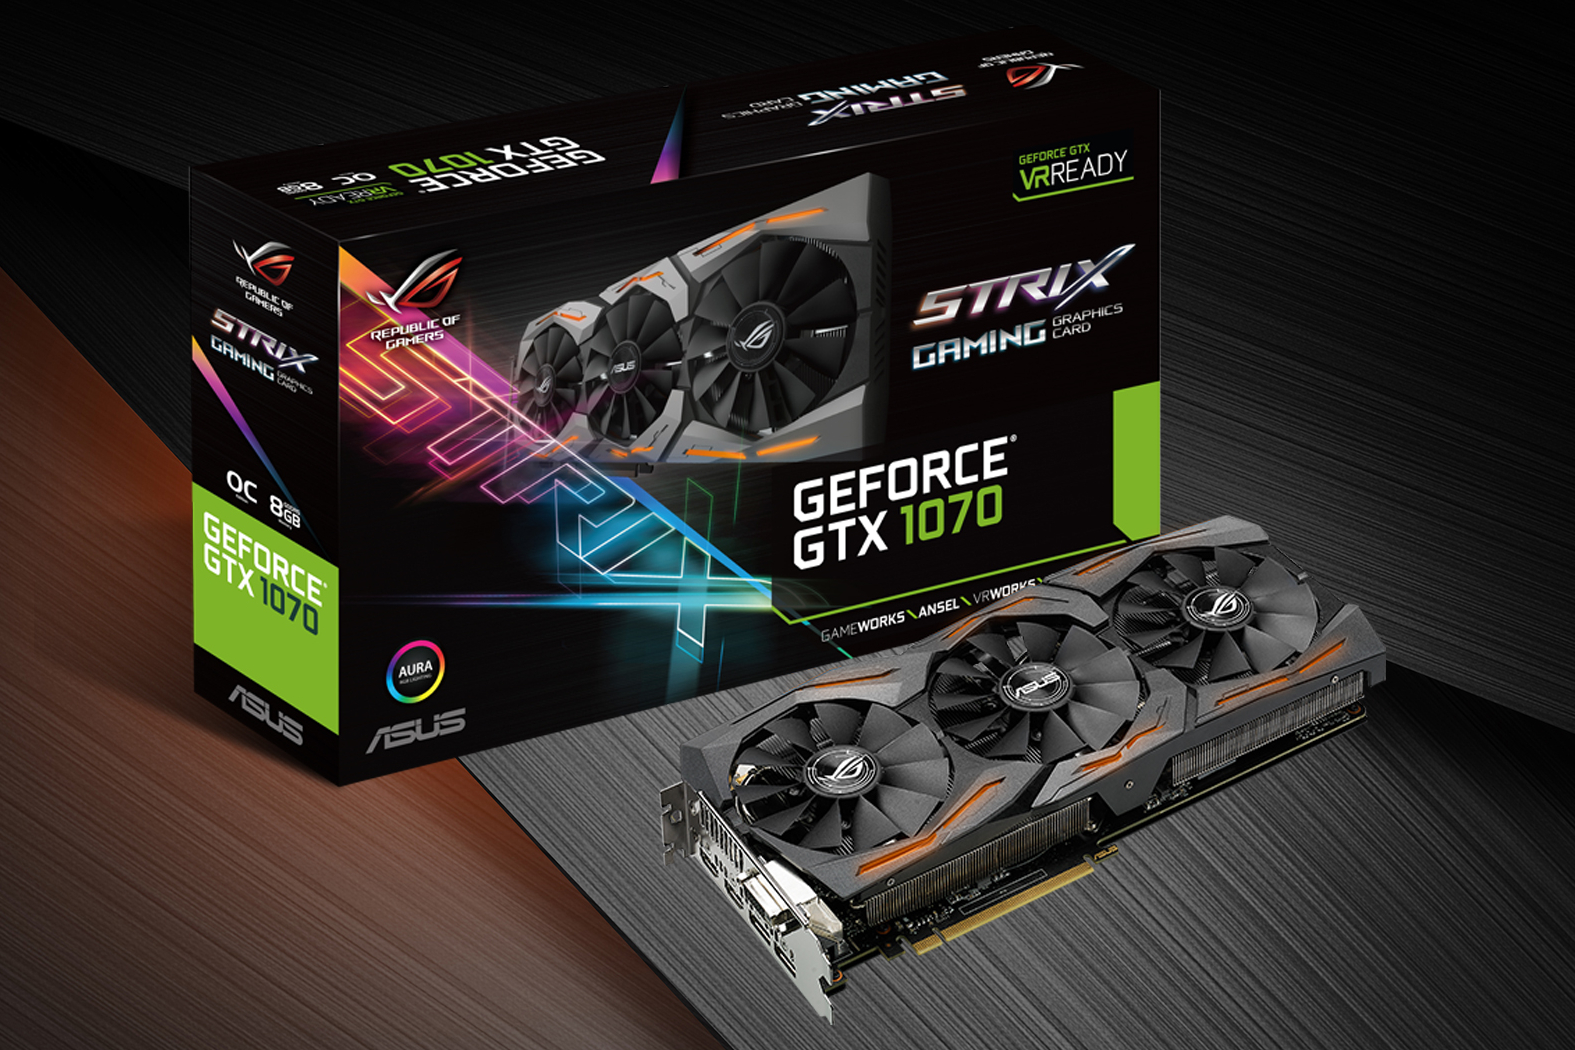 The Asus ROG Strix GTX 1070 Hits The Streets In 2 Flavors